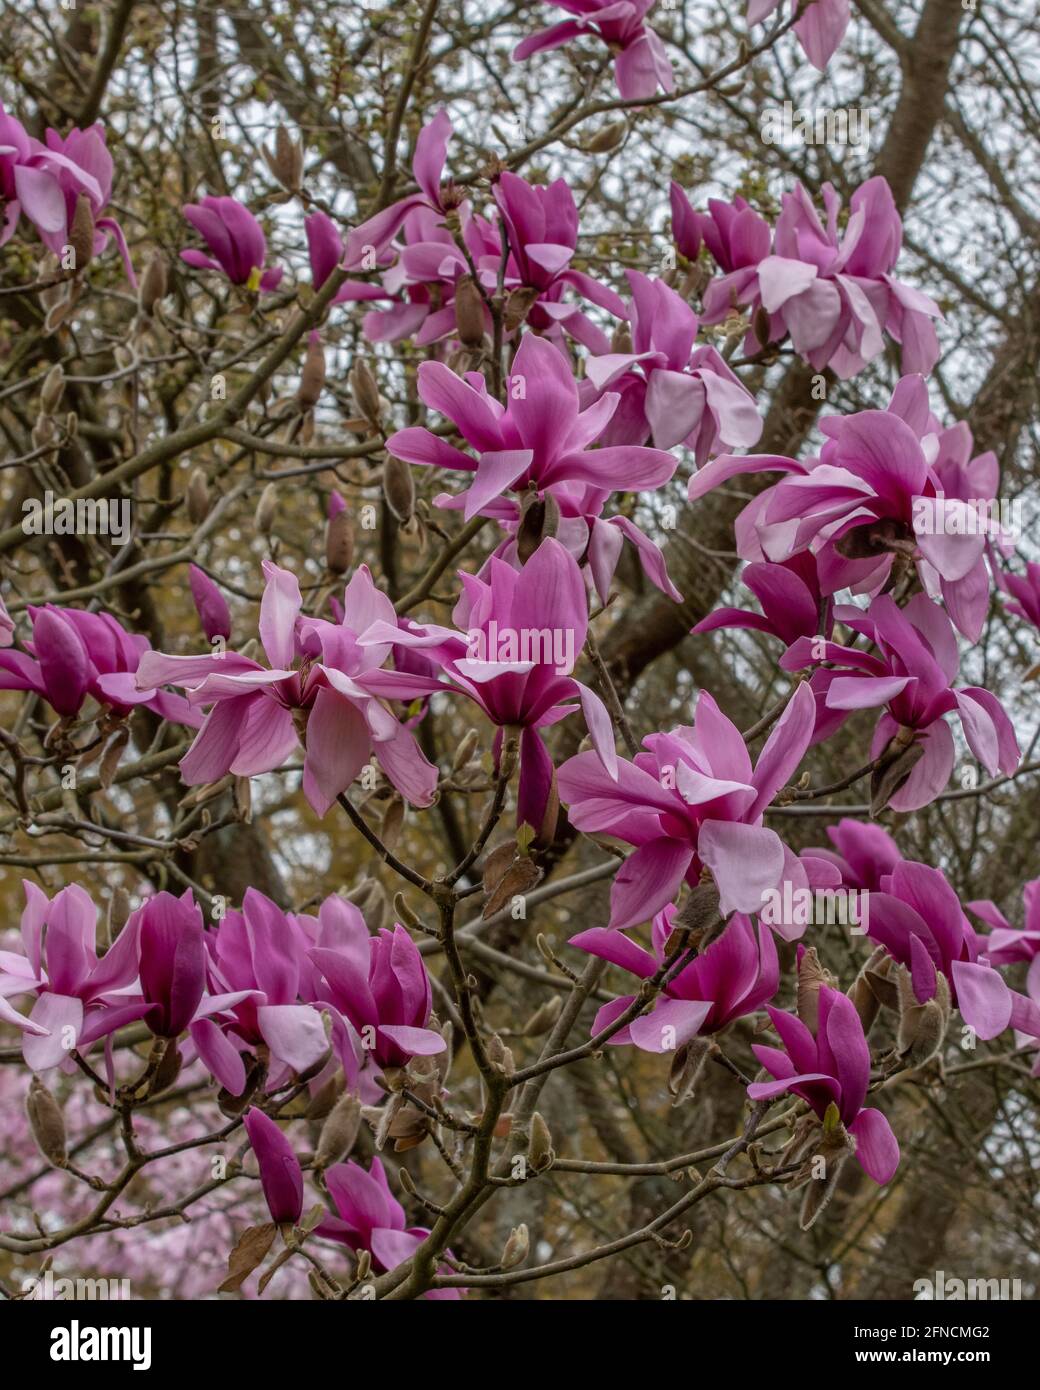 Mass of large purple Magnolia Ruth flowers in spring Stock Photo